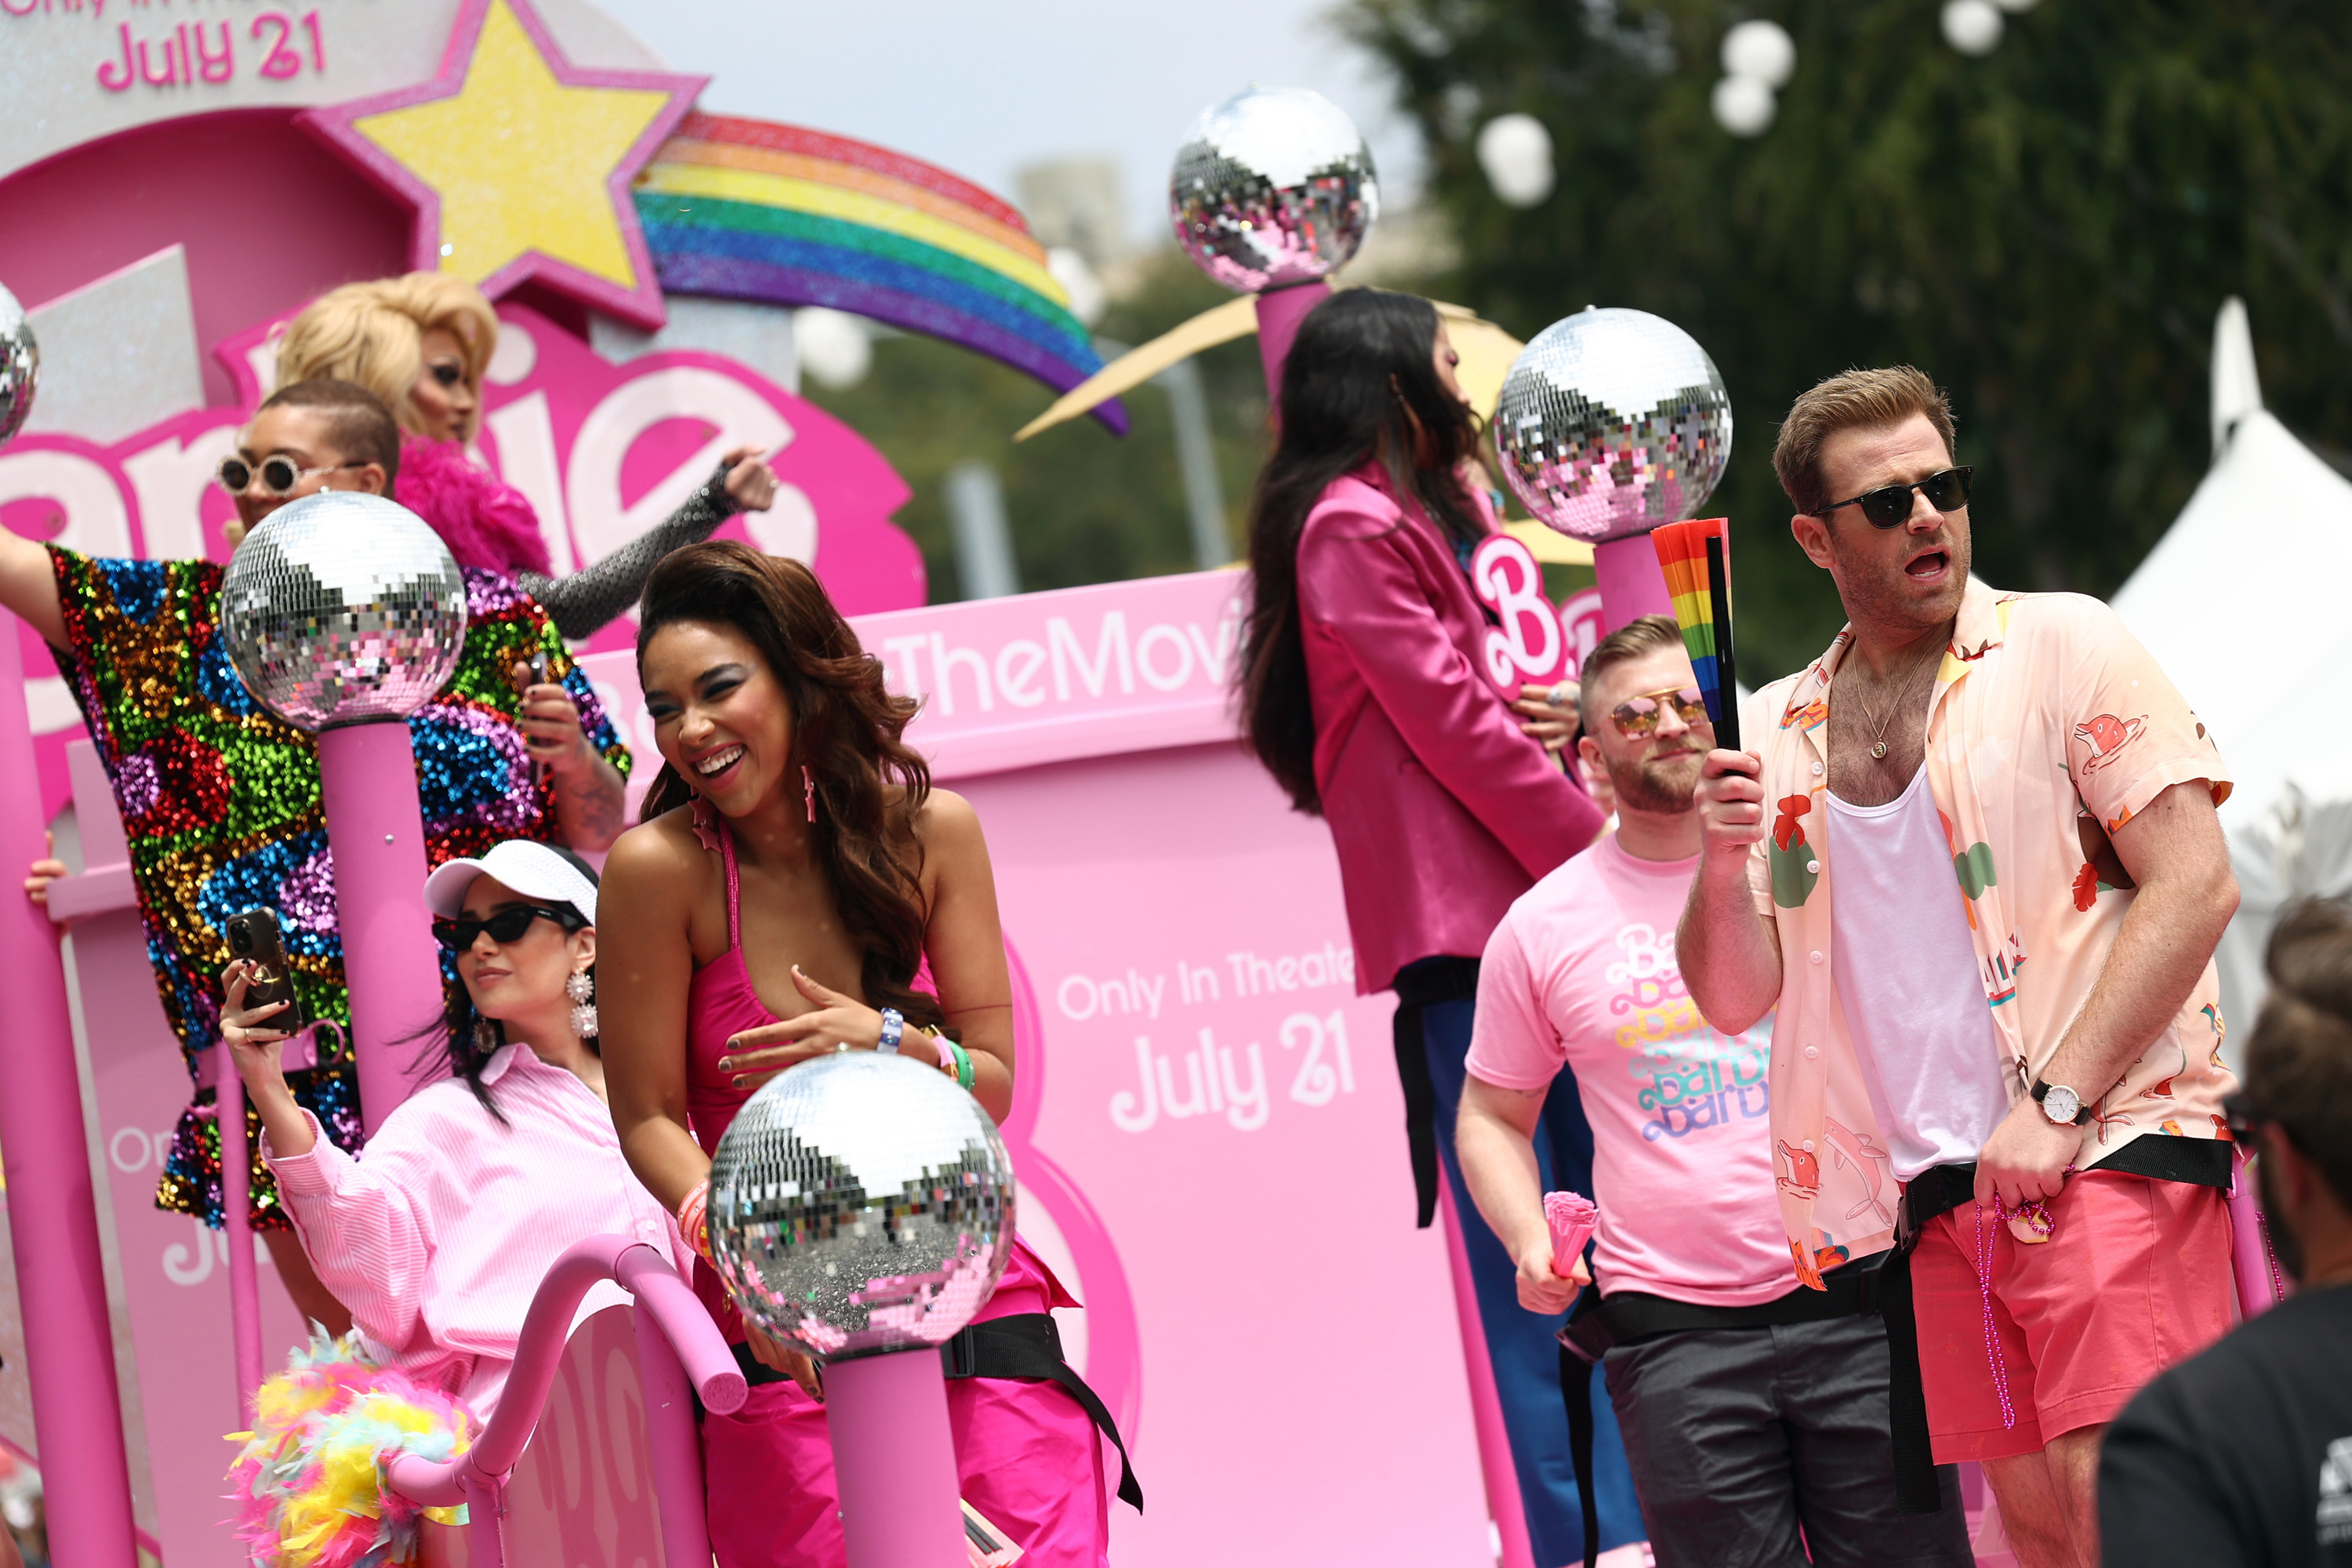 Alexandra Shipp and Scott Evans on the &quot;Barbie&quot; float at the Pride parade